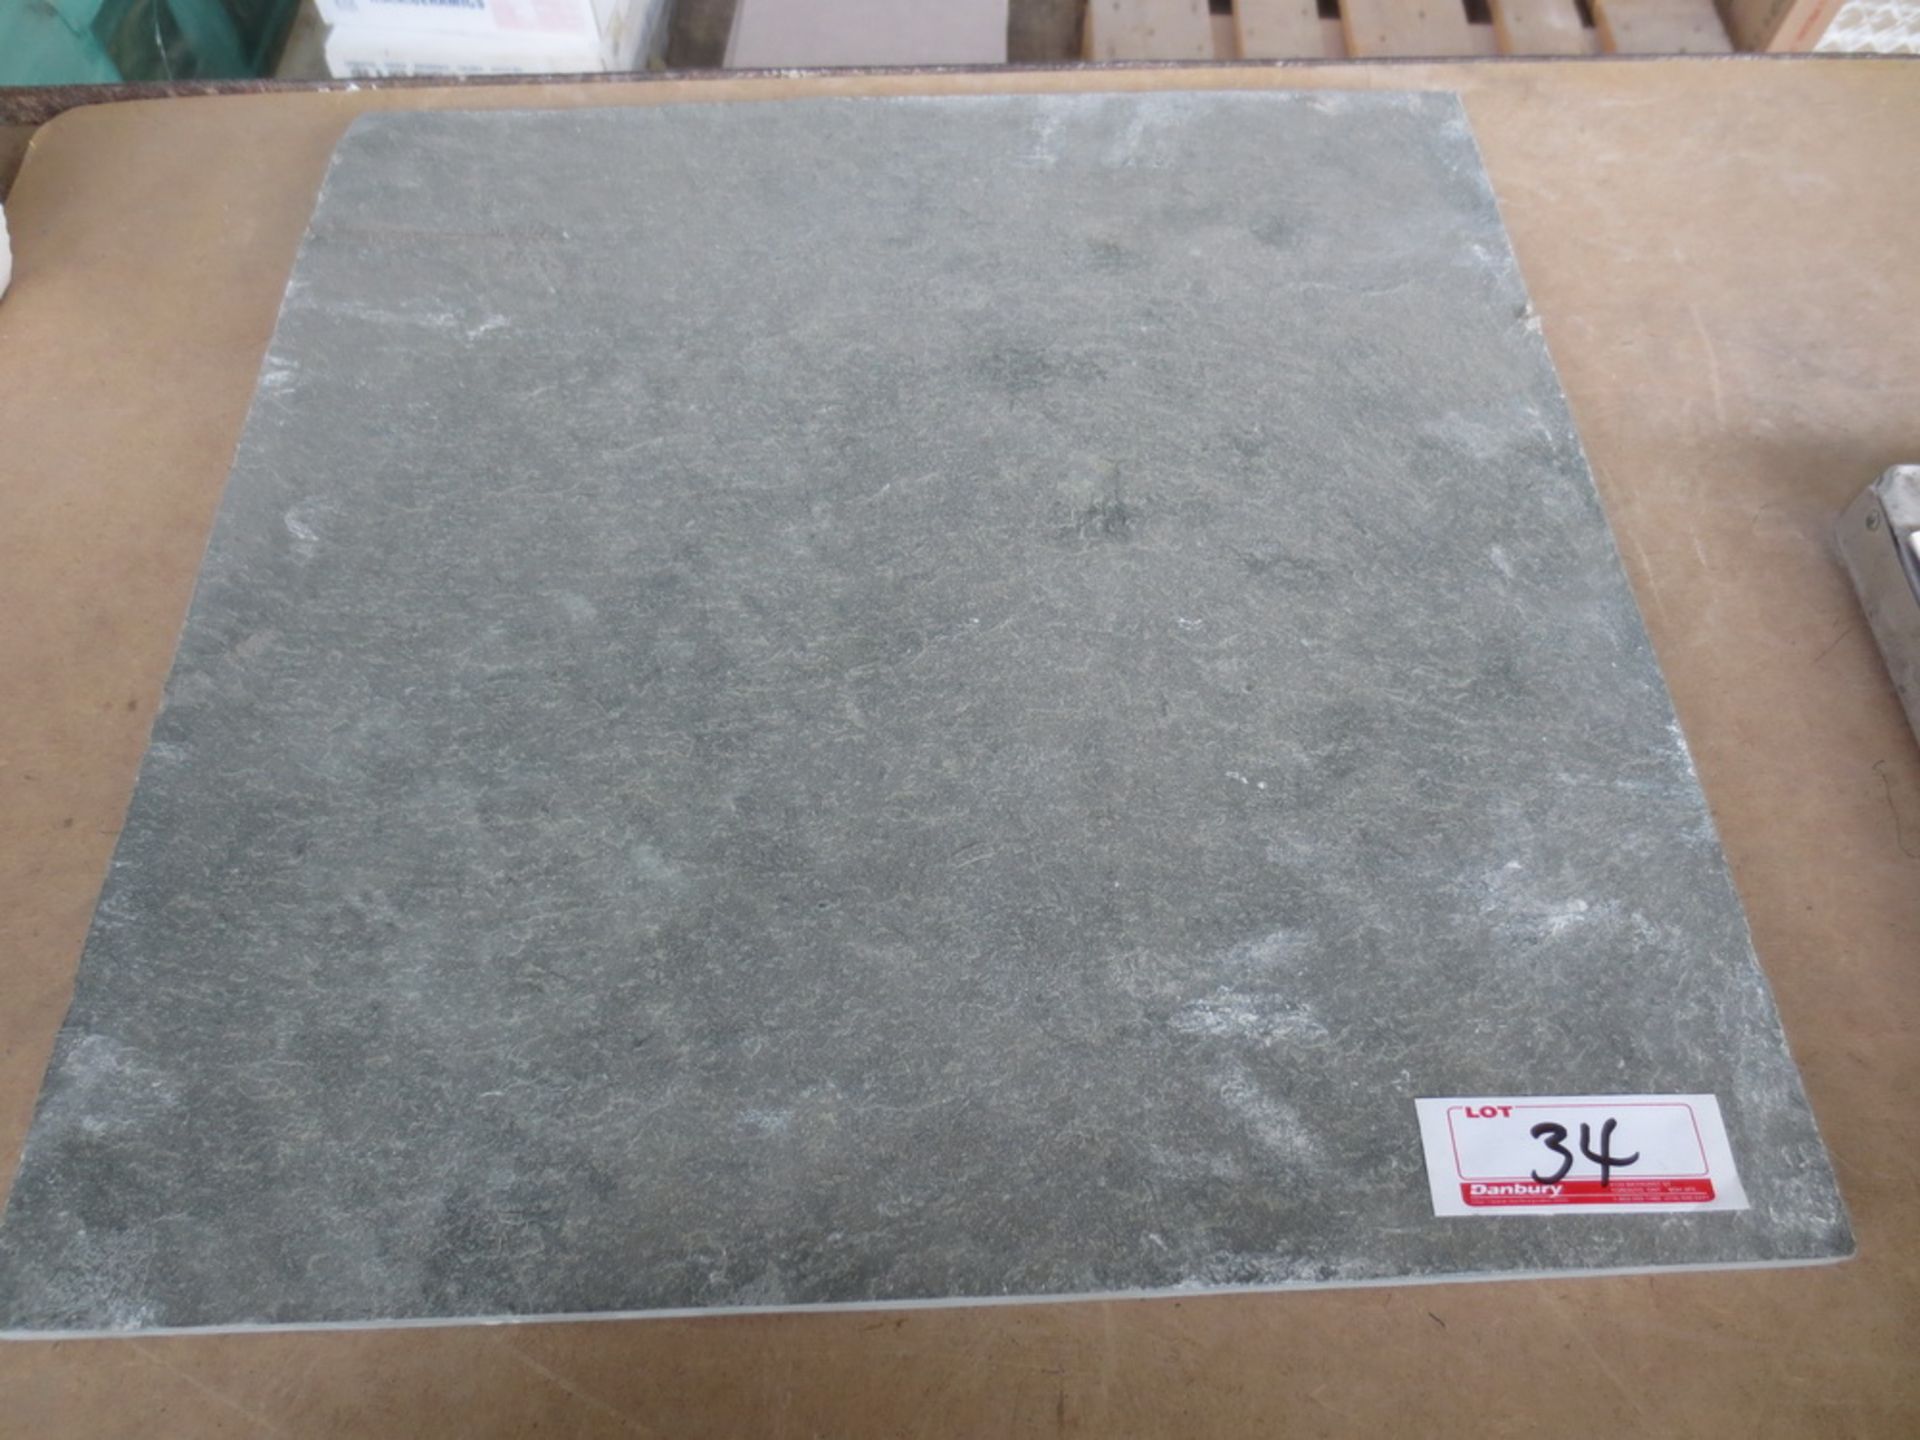 256 - SQ. FT. GREEN APPROX 153/4X153/4 SLATE TILE 25 BOXES